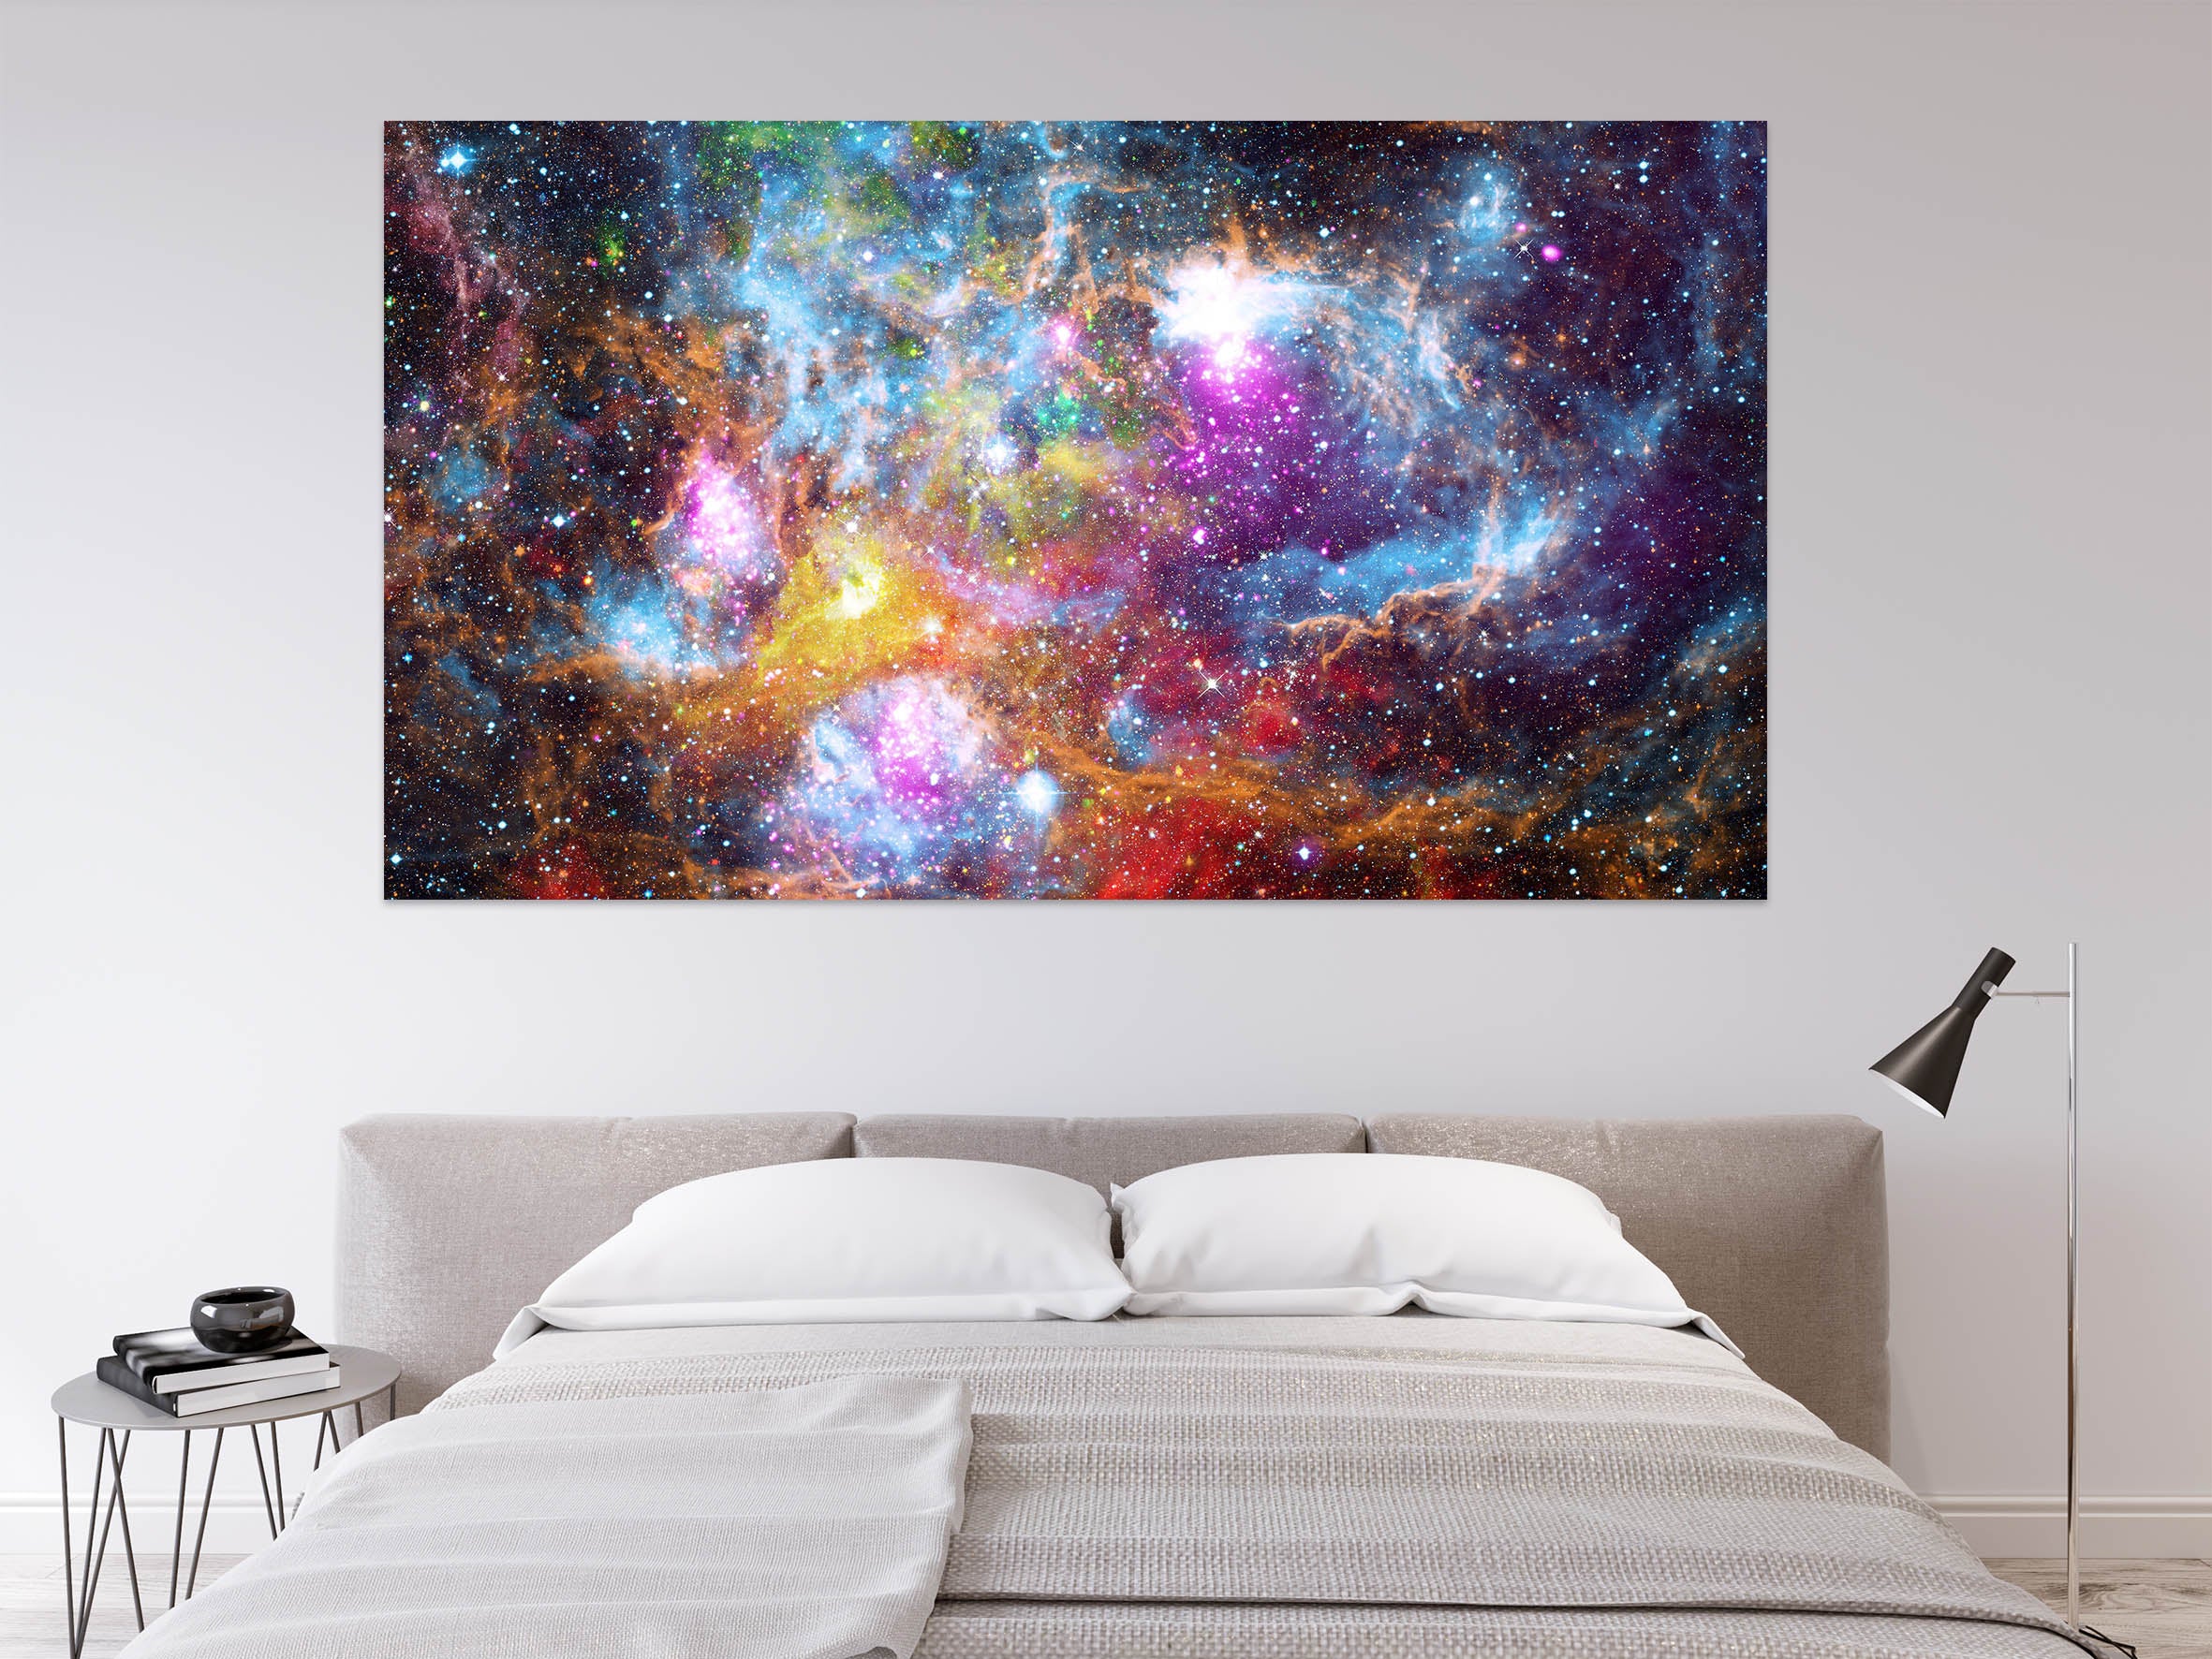 3D Color Starry Sky 1092 Wall Sticker